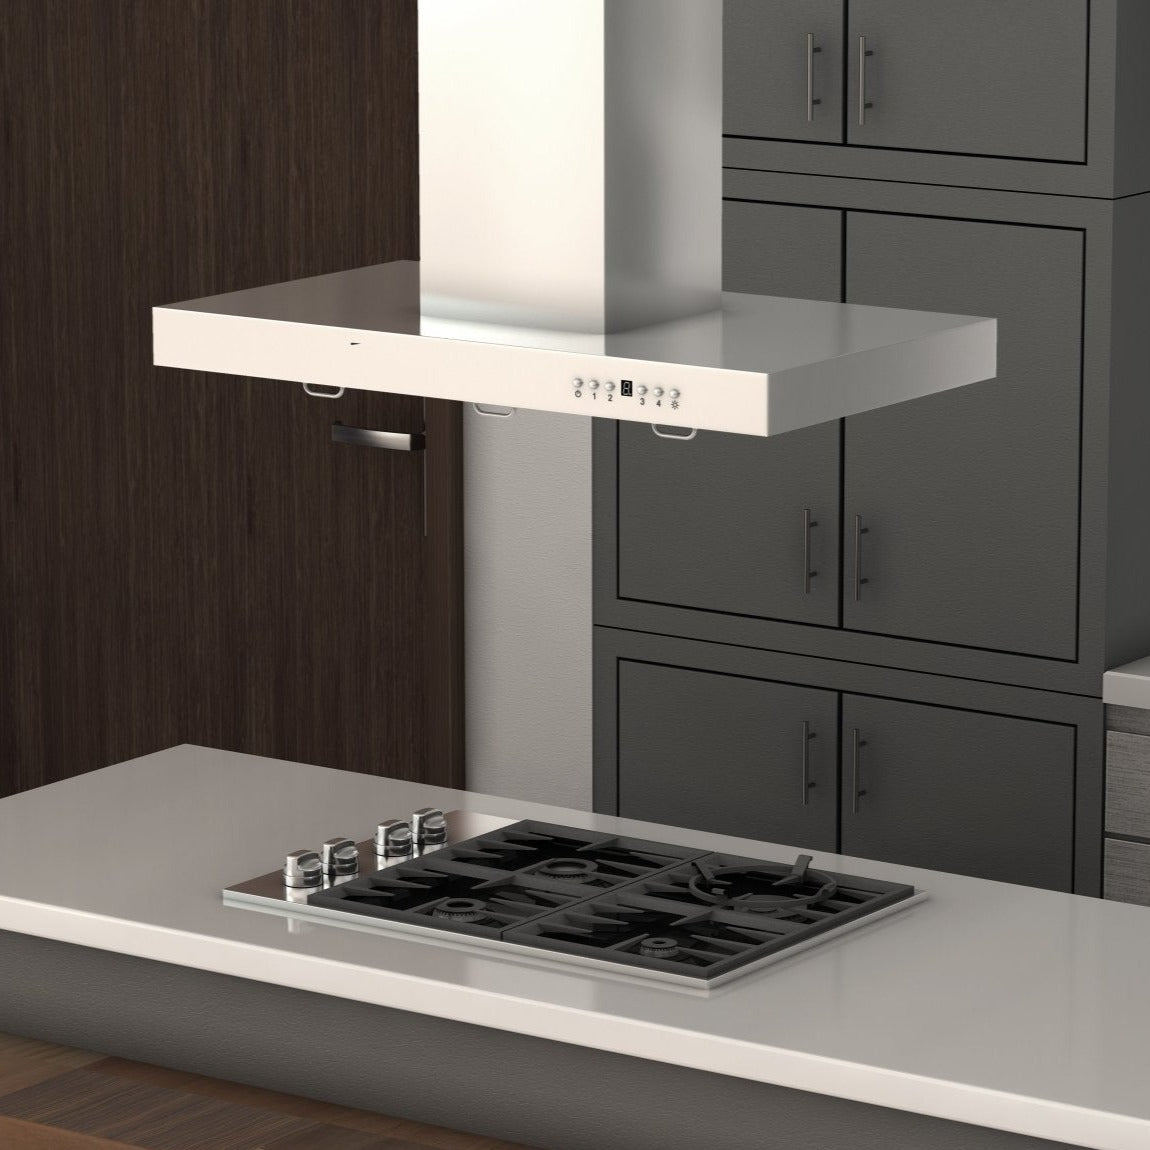 ZLINE Convertible Vent Island Mount Range Hood in Stainless Steel (KE2i) in modern luxury kitchen above cooktop with white countertop side view